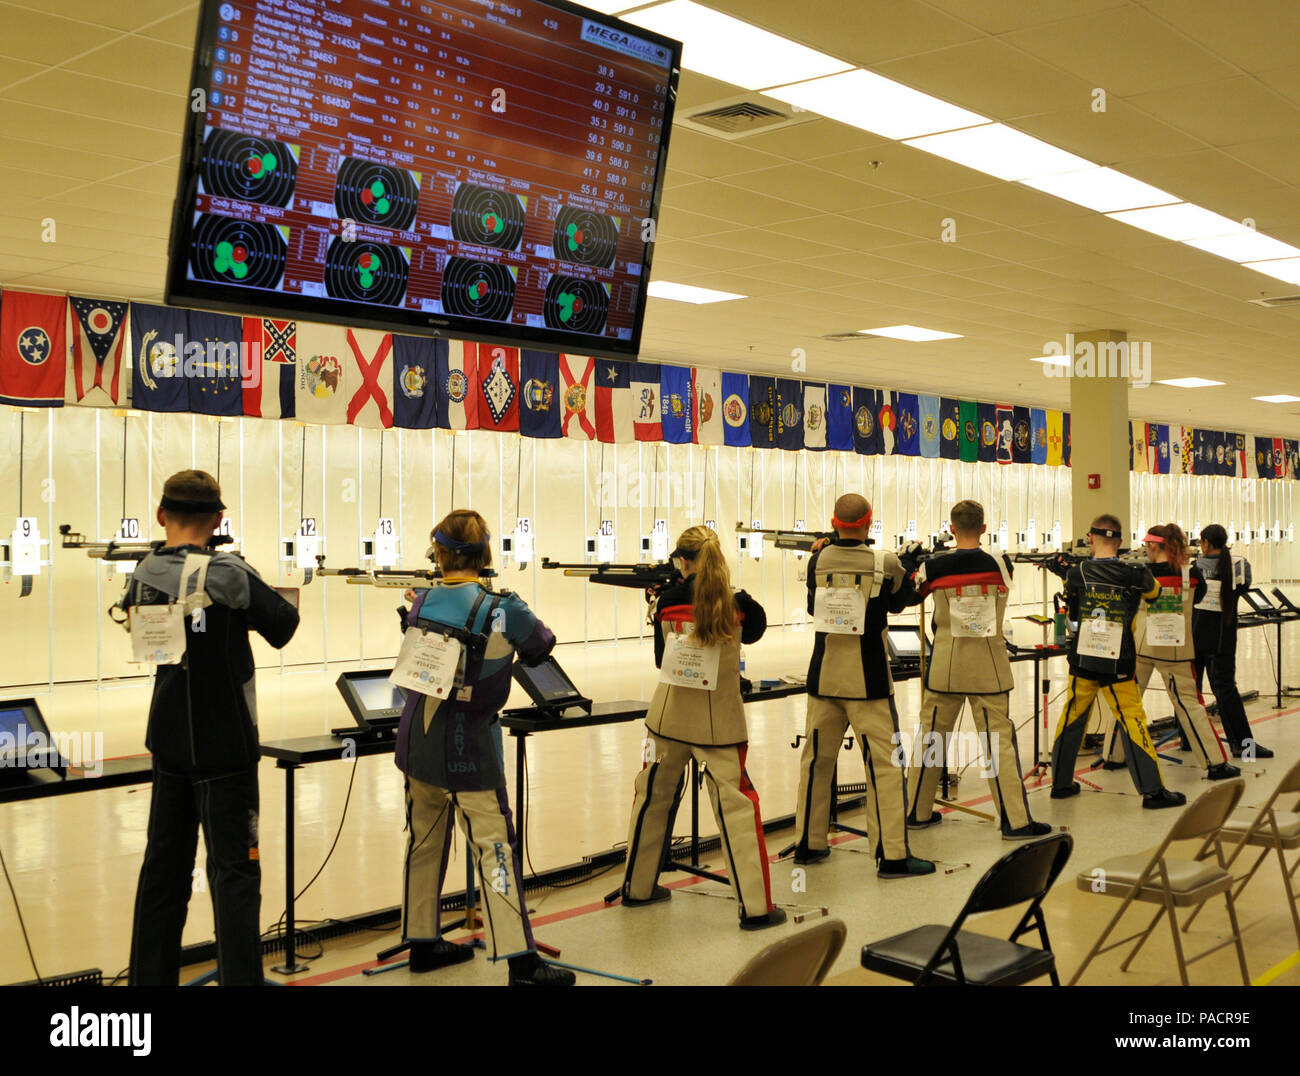 Anniston, Ala., was the site for the 2016 Junior Reserve Officer Training Corps National Air Rifle Championships held on March 17-19 at the Civilian Marksmanship Program Range. The competition consisted of over 200 high school students on 56 teams from 73 high schools nationwide. Through various previous competitions, the participating schools earned the right to shoot at the National Championship. Individual winners in either the Sporter or Precision categories receive medals and cash prizes as well as the attention of university recruiters whose schools also have riflery as a scholarship spo Stock Photo